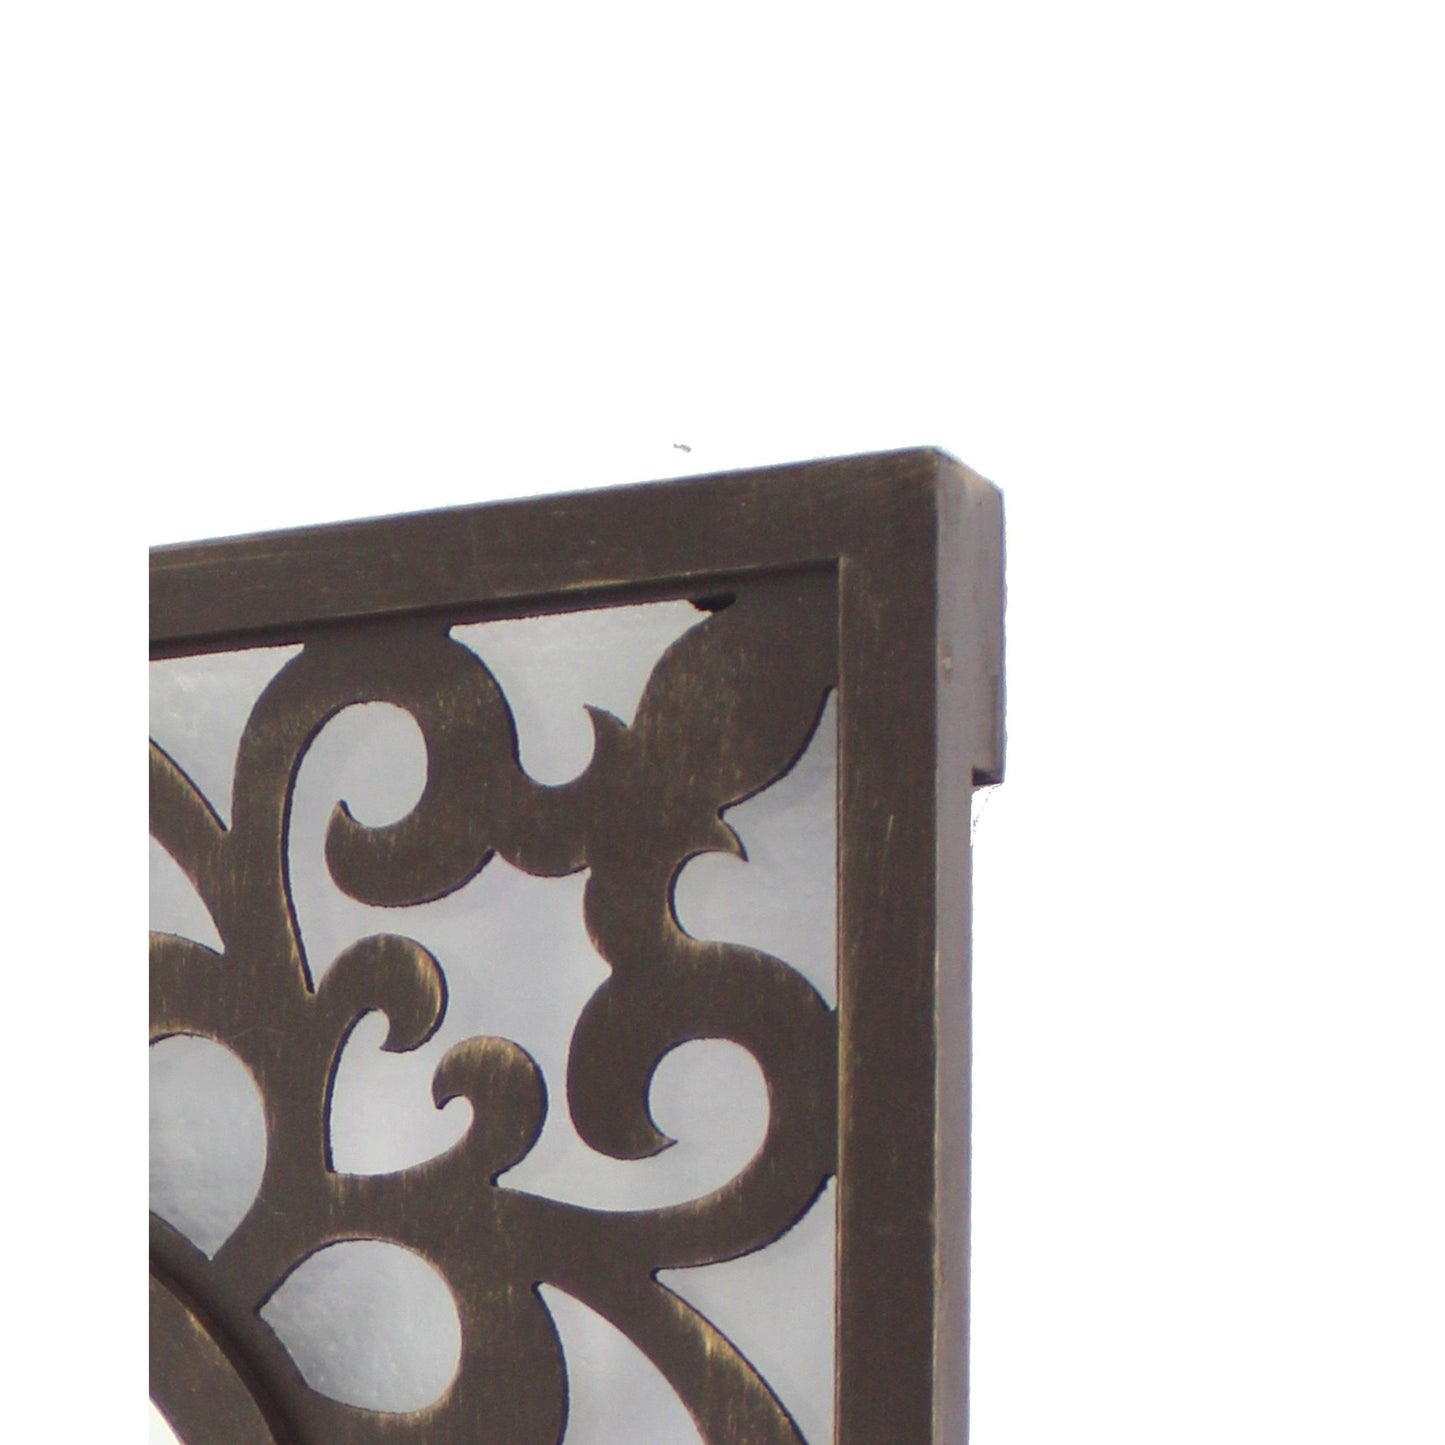 Benzara Espresso Wooden Frame Square Wall Mirror With Floral Cut Out Design